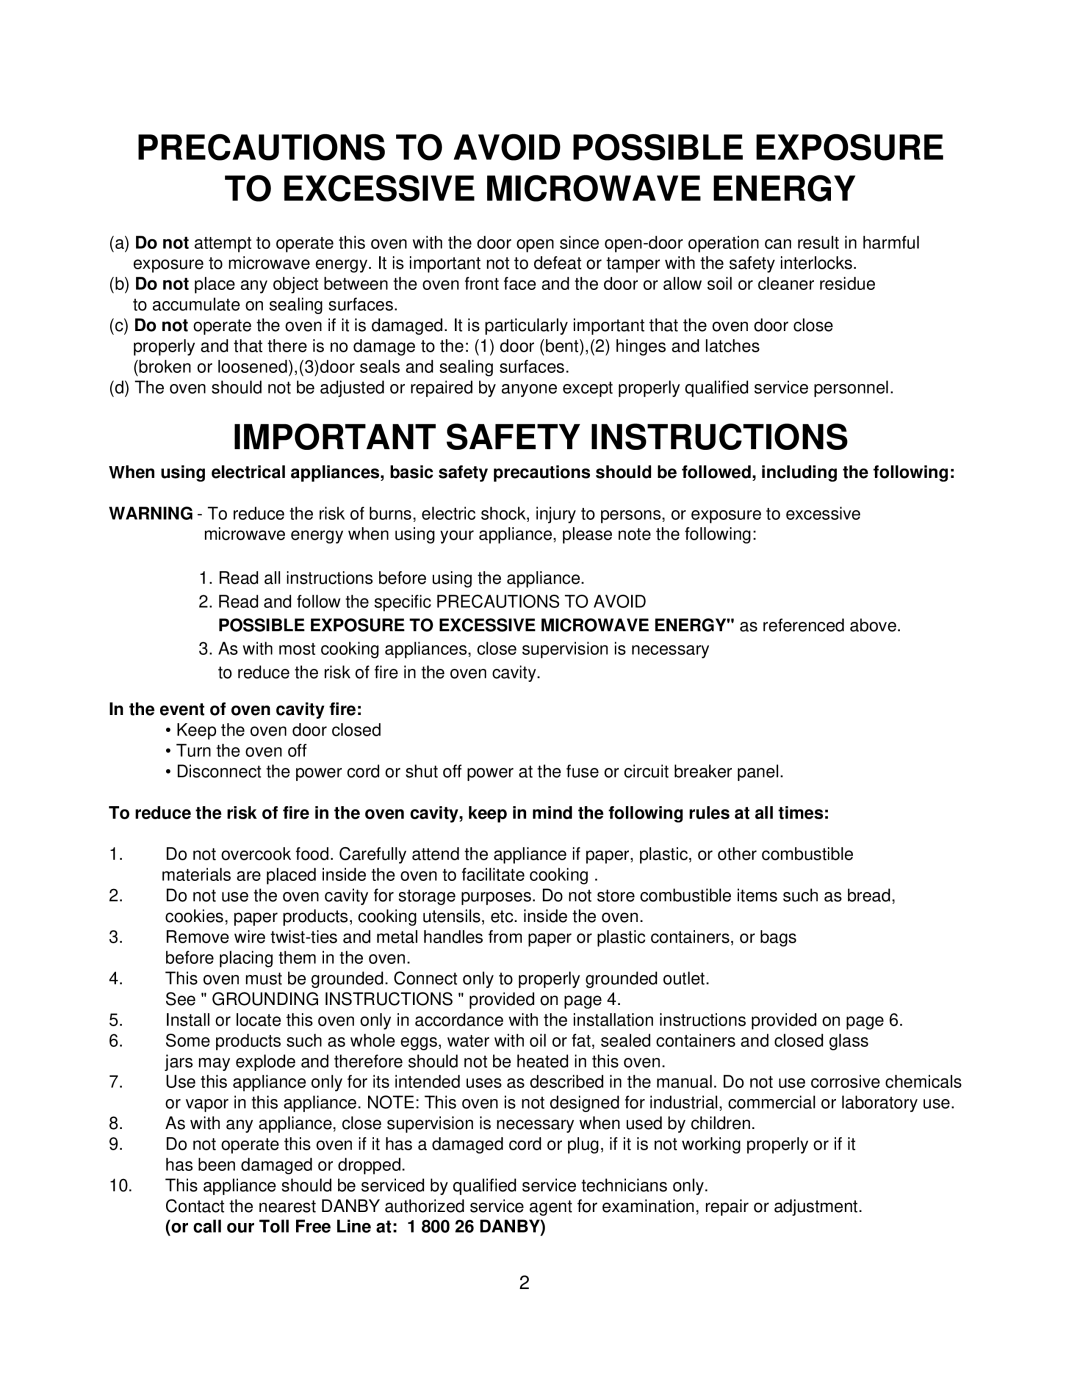 Danby DMW1400W manual Precautions To Avoid Possible Exposure To Excessive Microwave Energy, Important Safety Instructions 